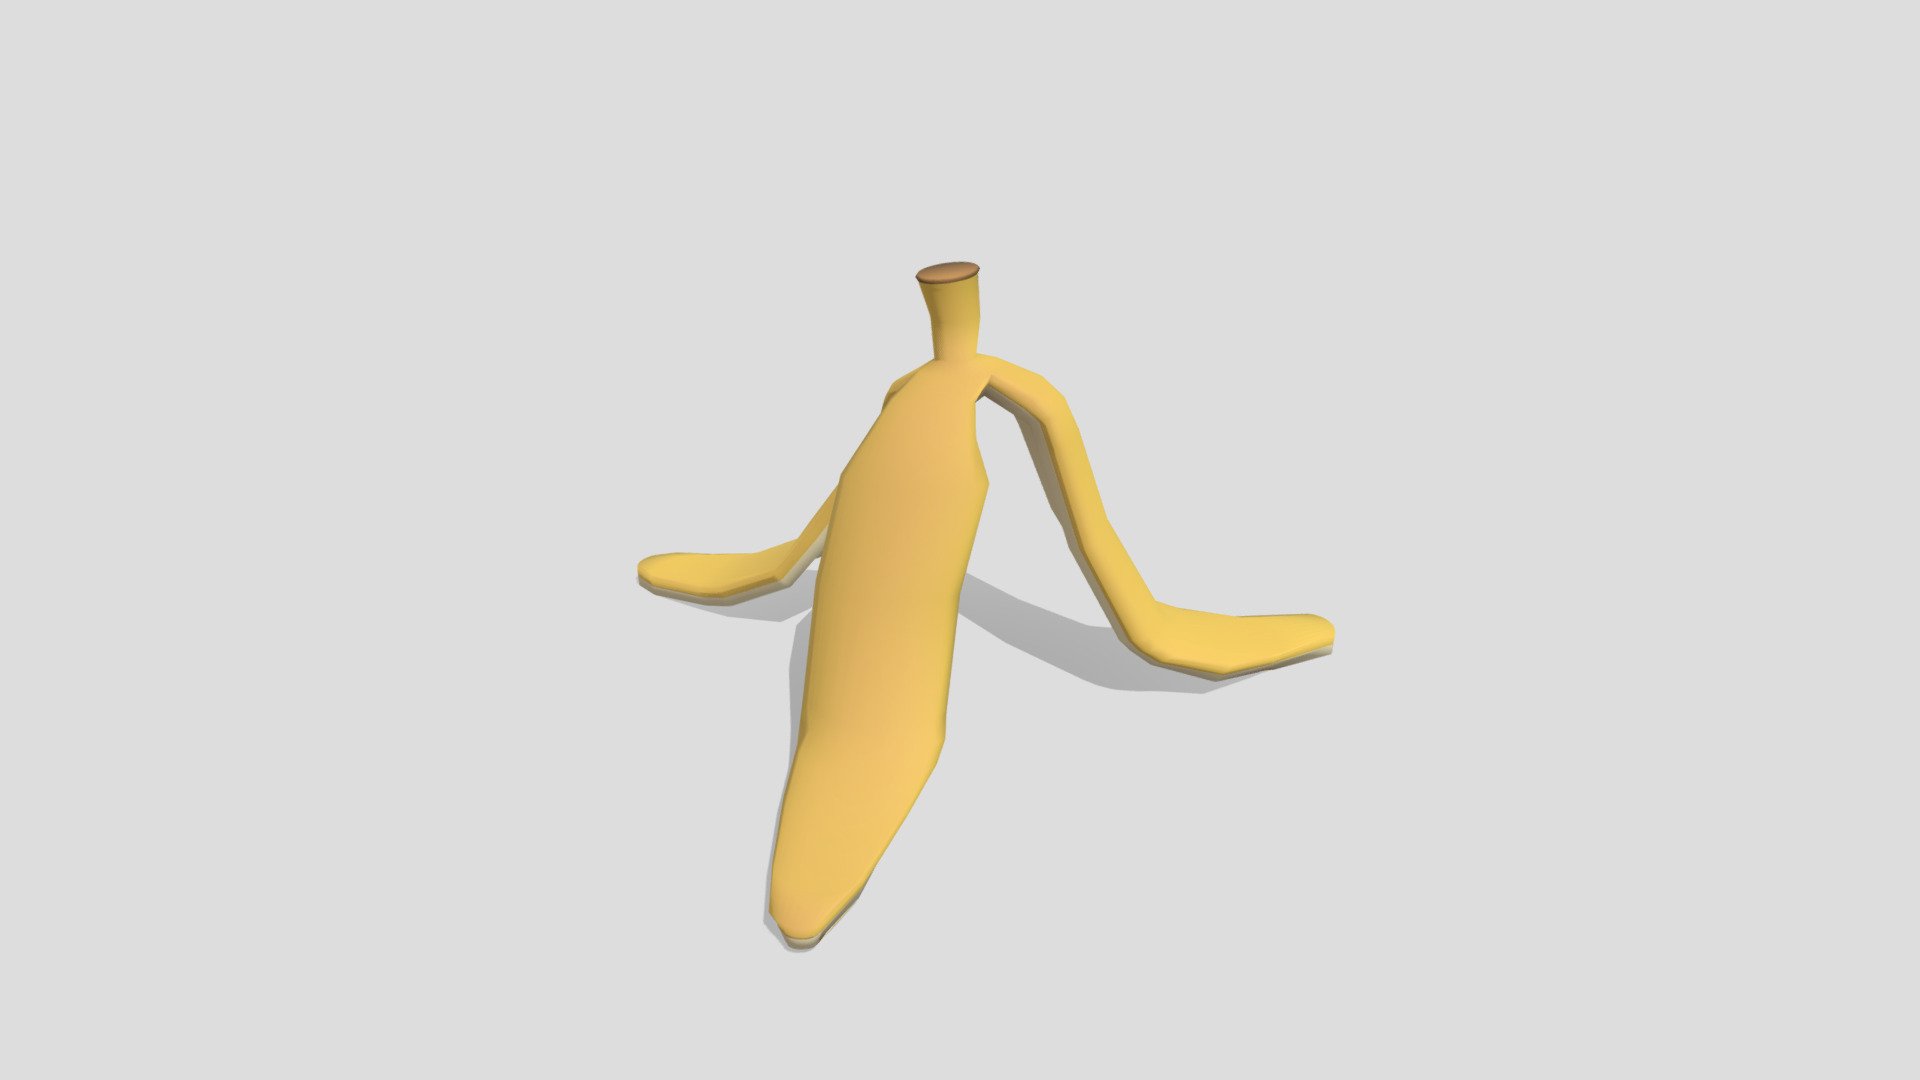 Cartoon stylized banana skin garbage. Low poly game AR VR ready asset.



Model comes with 2048x2048 PNG PBR textures of Color, Roughness and Normal Map




Made for #SketchfabWeeklyChallenge topic &ldquo;Garbage